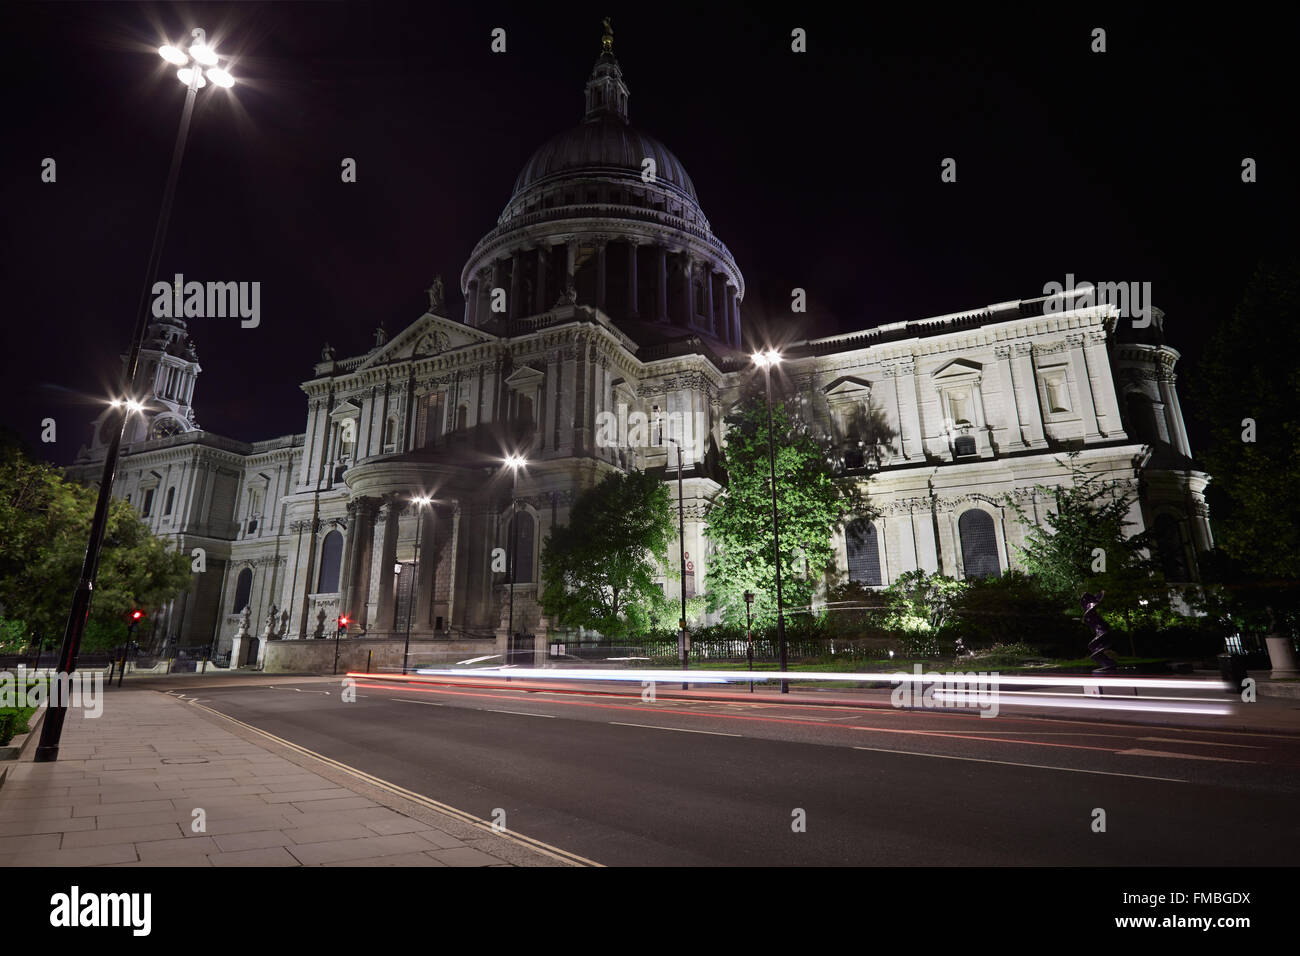 St Paul's cathedral illuminated at night in London, empty street and car passing lights Stock Photo